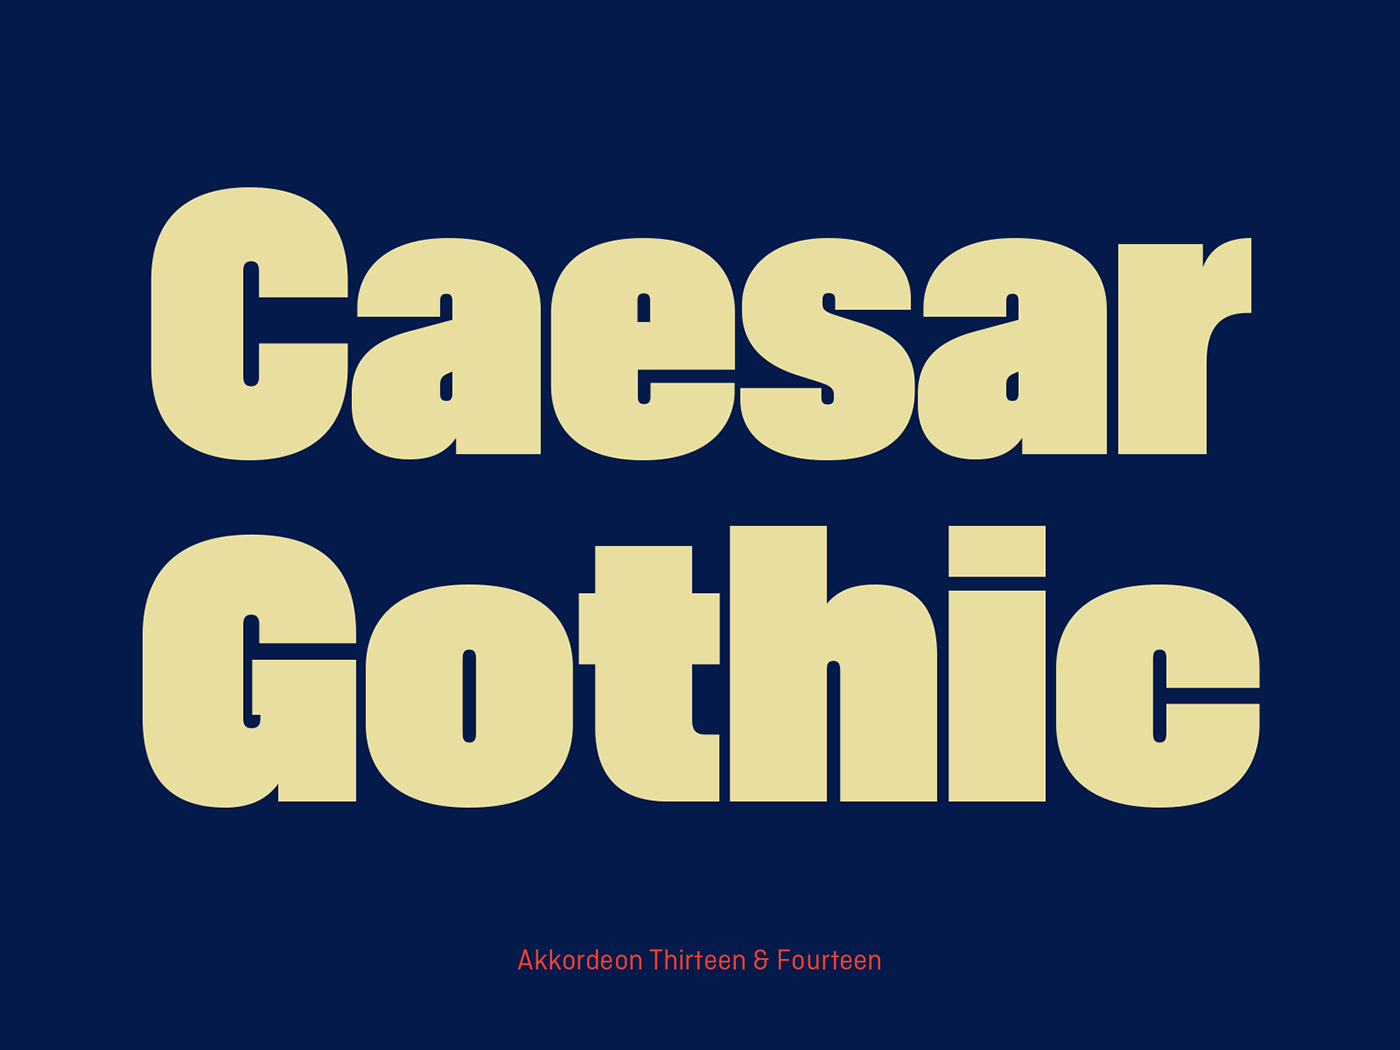 barcelona sans grotesque Display Heavy font condensed free Free font wood type